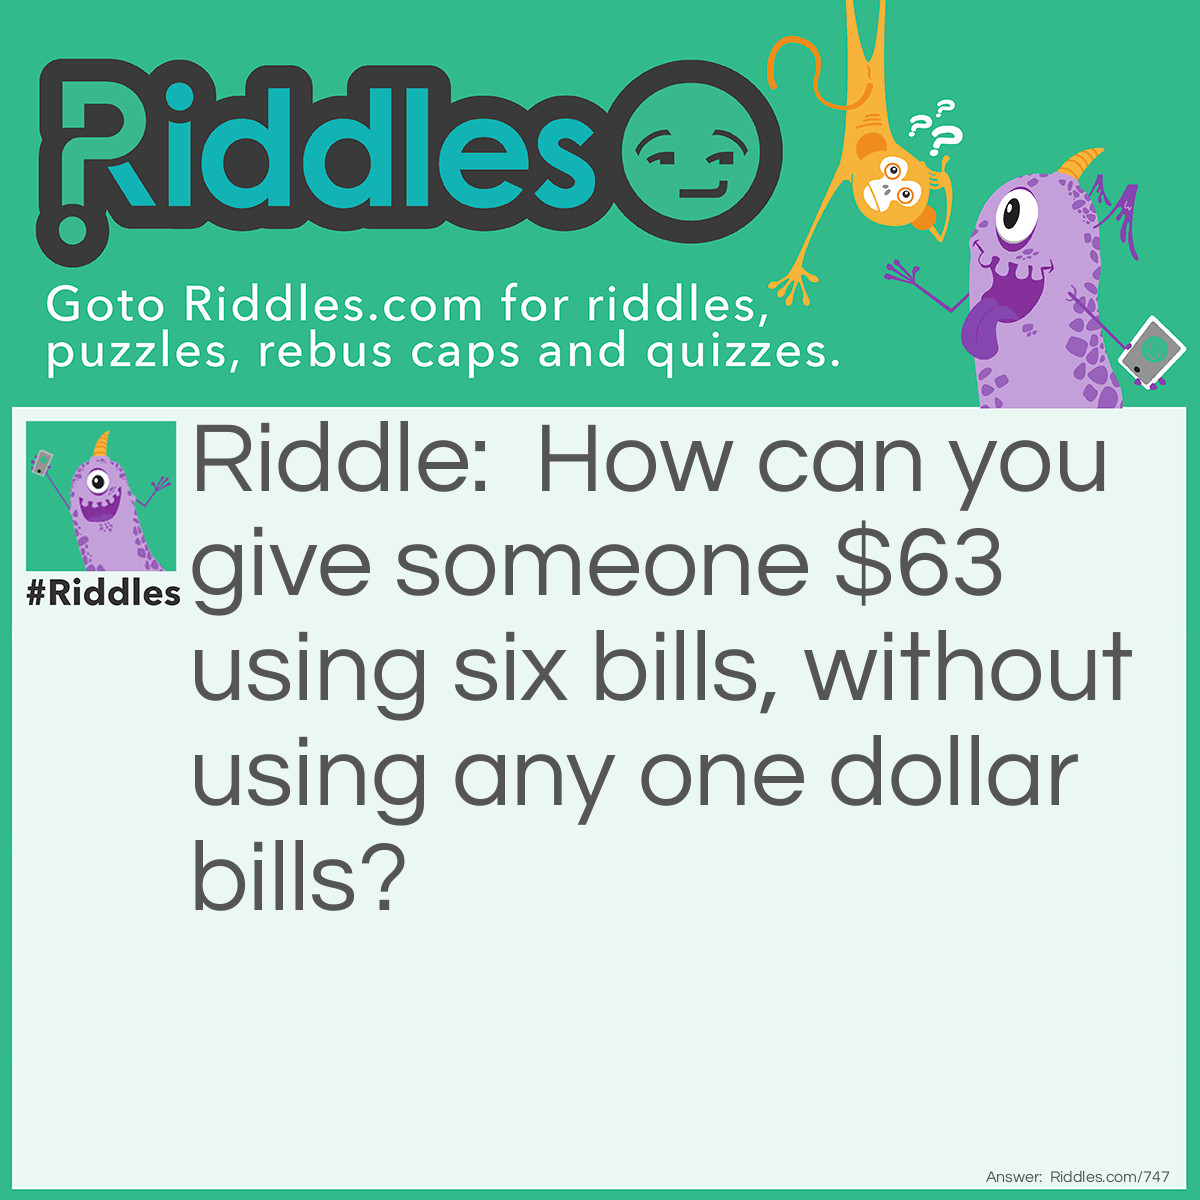 Riddle: How can you give someone $63 using six bills, without using any one dollar bills? Answer: 1 - $50 bill, 1 - $5 bill , 4 - $2 bills